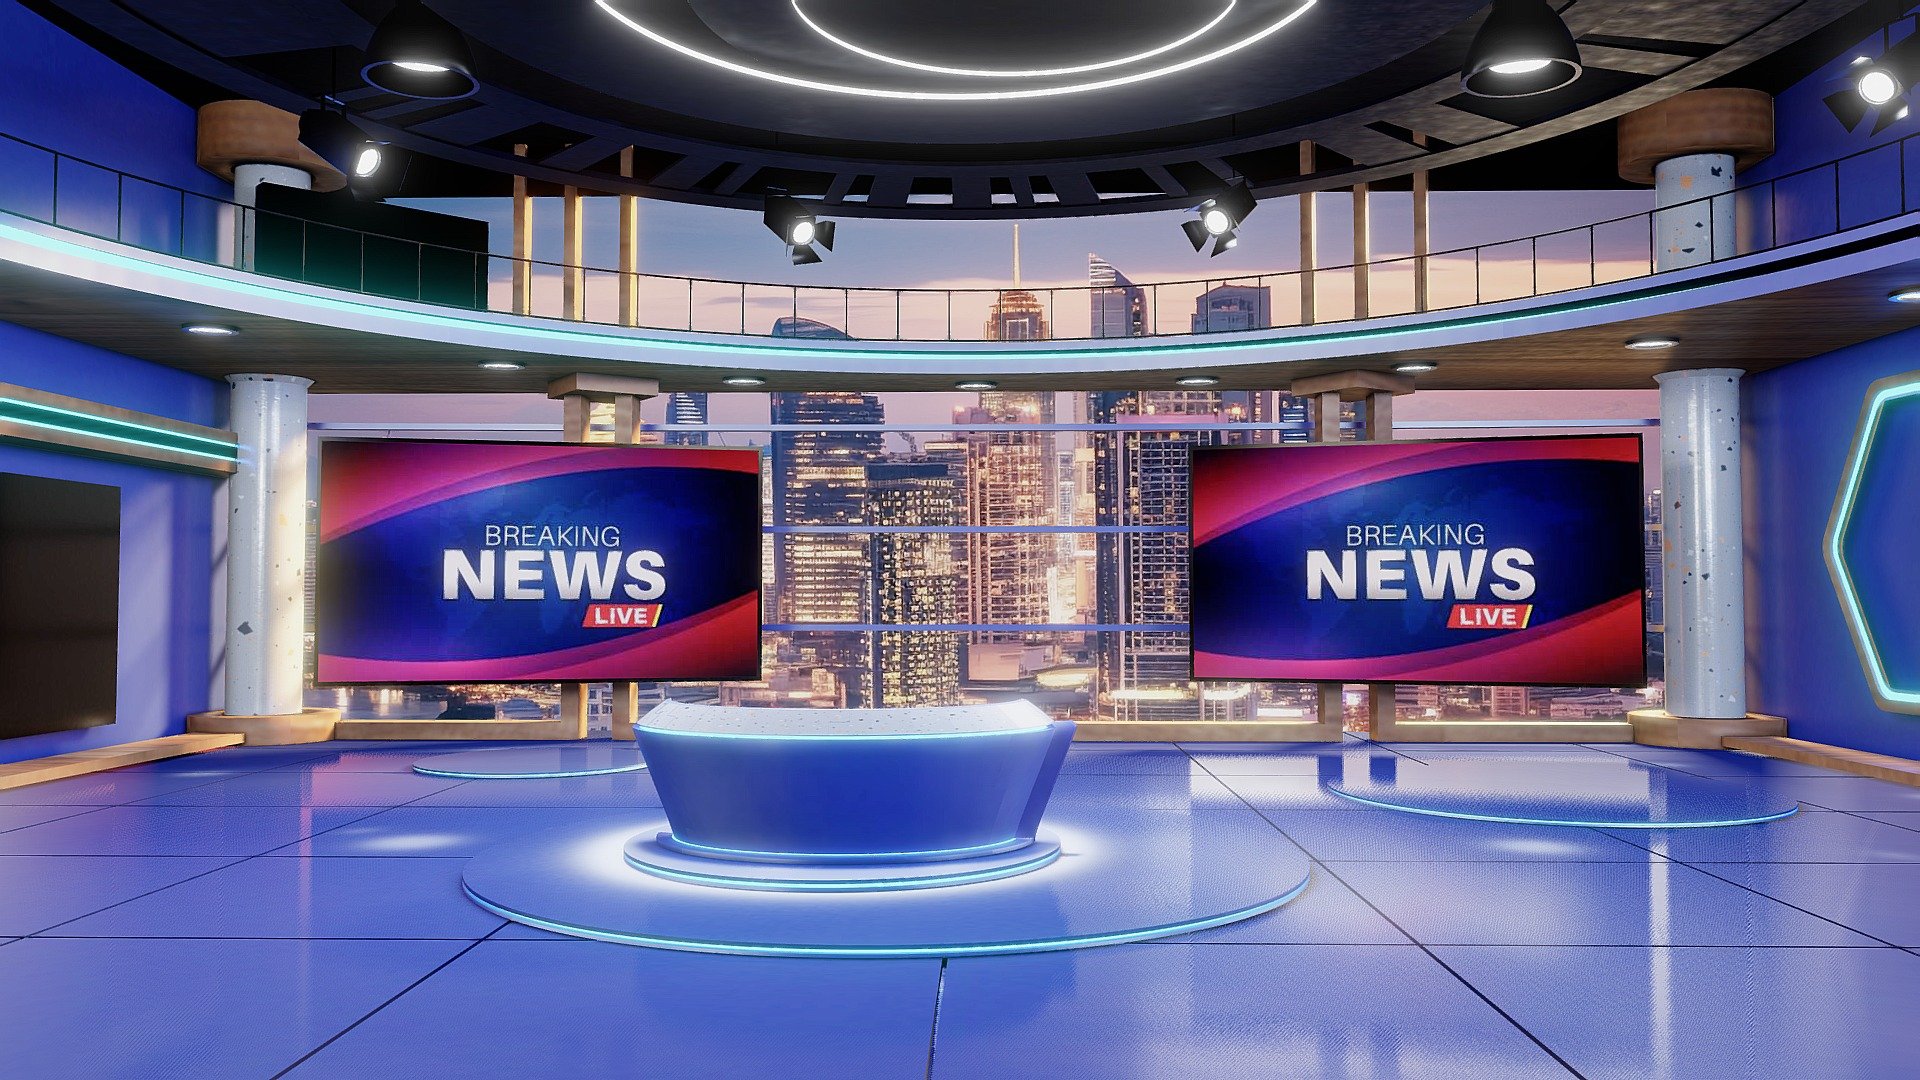 Broadcast news set design, interior layouts for news shows, television and television sets, blue screens can hold news contents. 
Designed in the style of futuristic urbanity 3d model